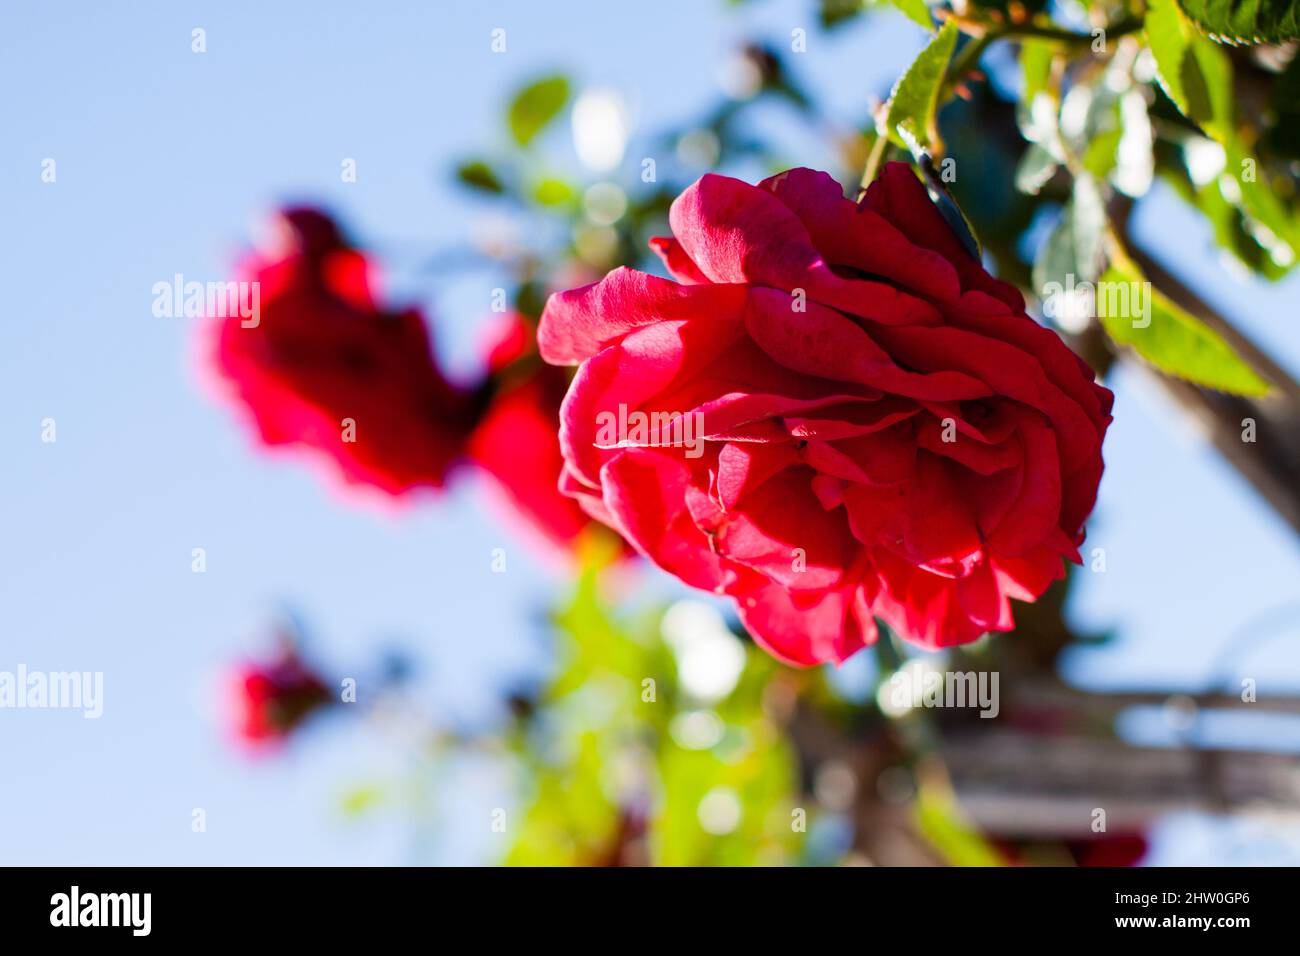 blooming red rose flower buds in the garden Stock Photo